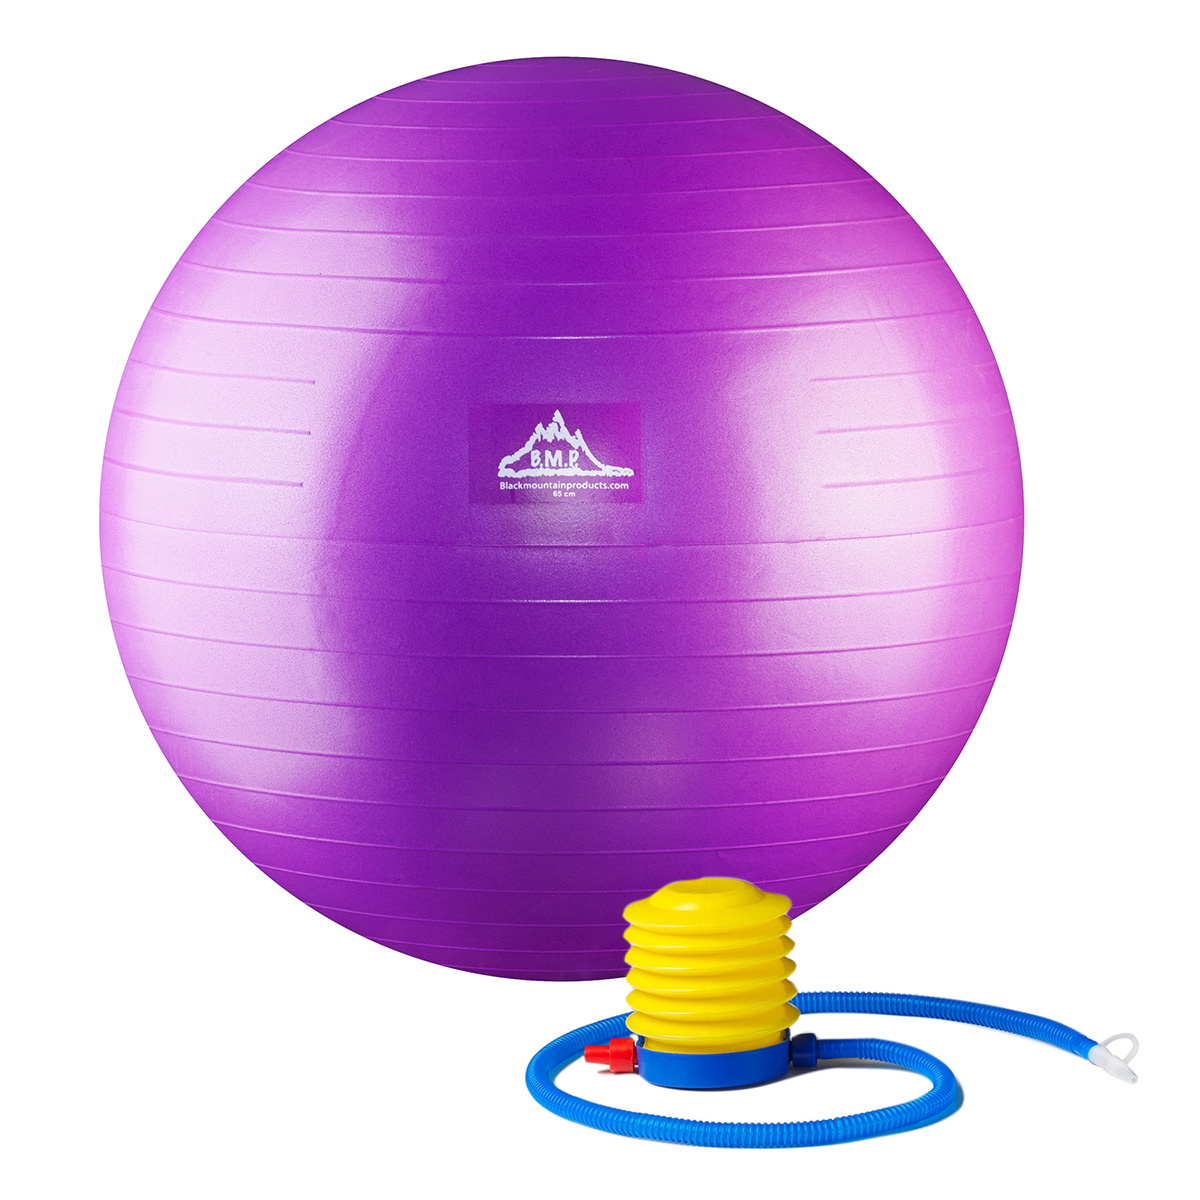 Professional Grade Stability Ball - Black Mountain Products